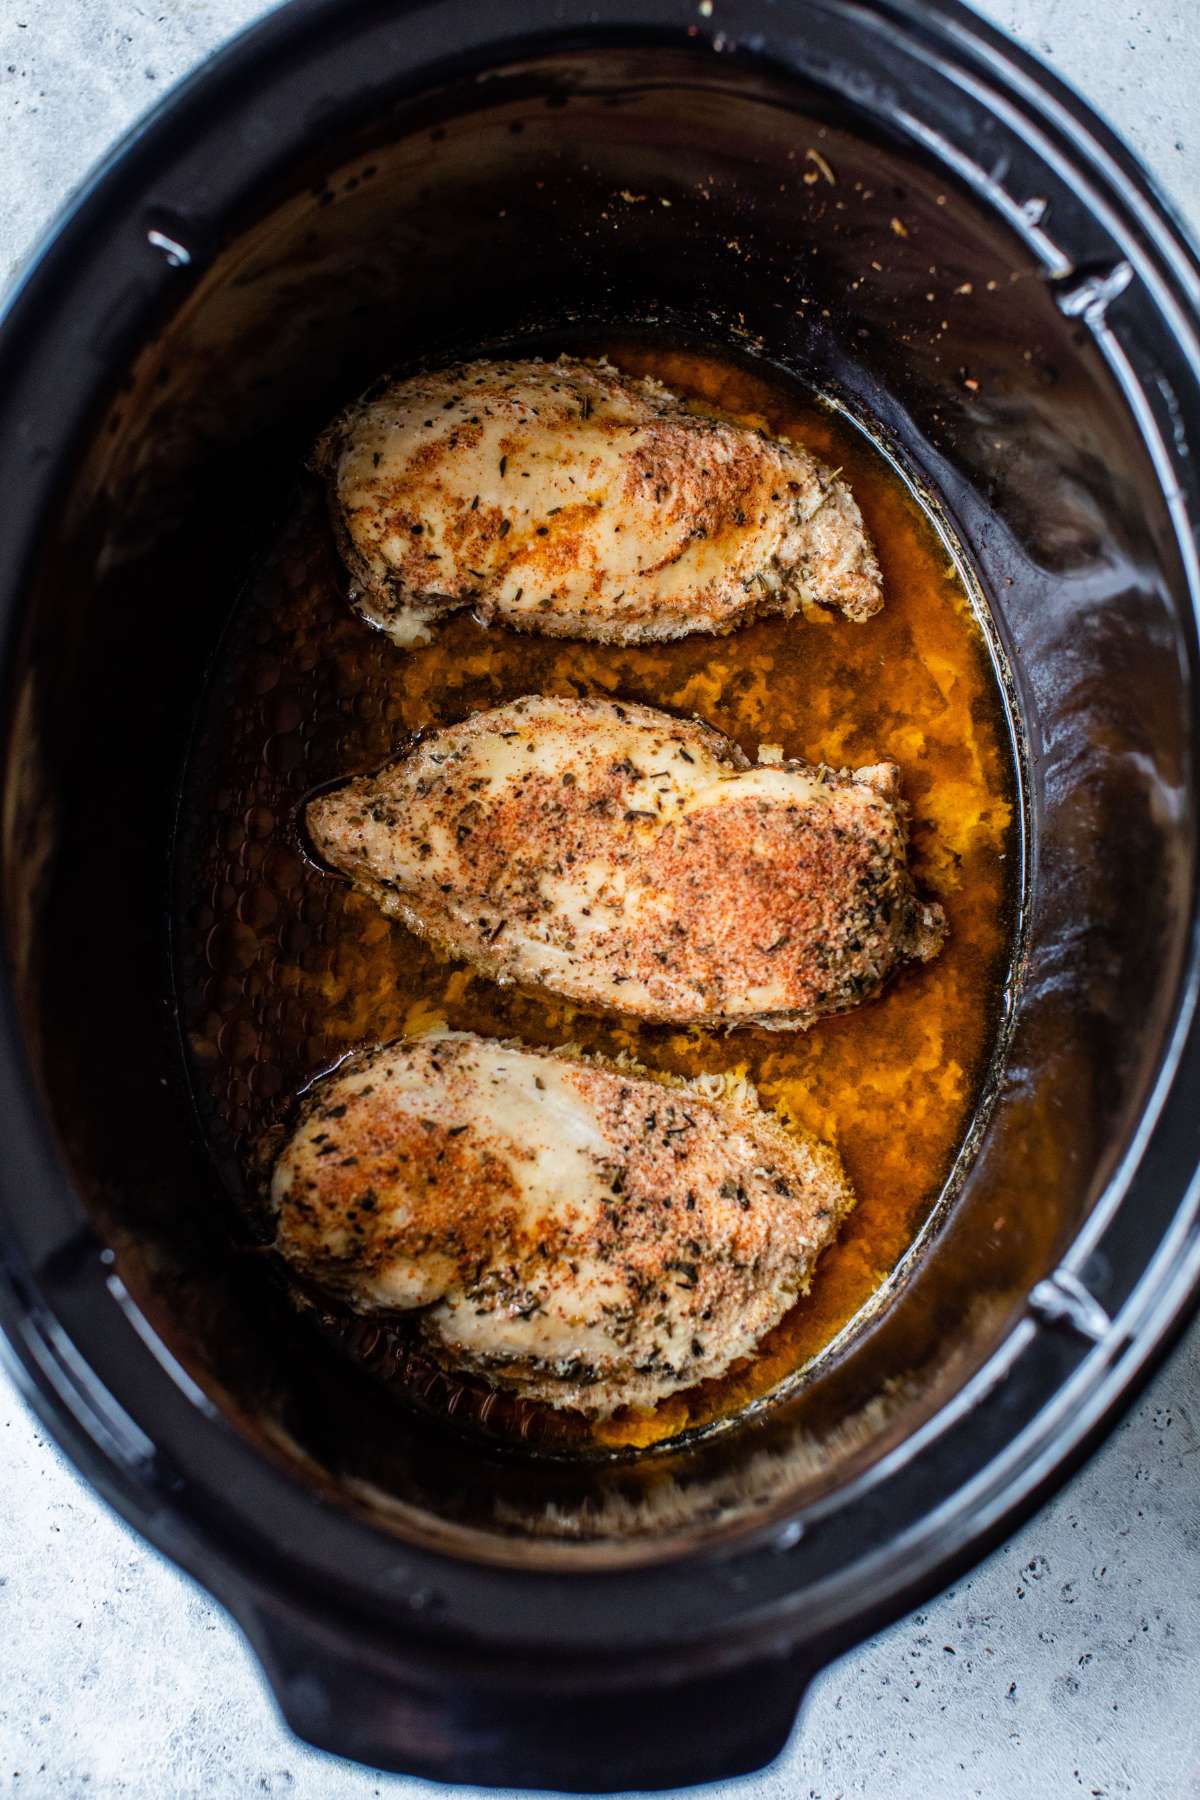 Cooked chicken breasts in a crockpot.